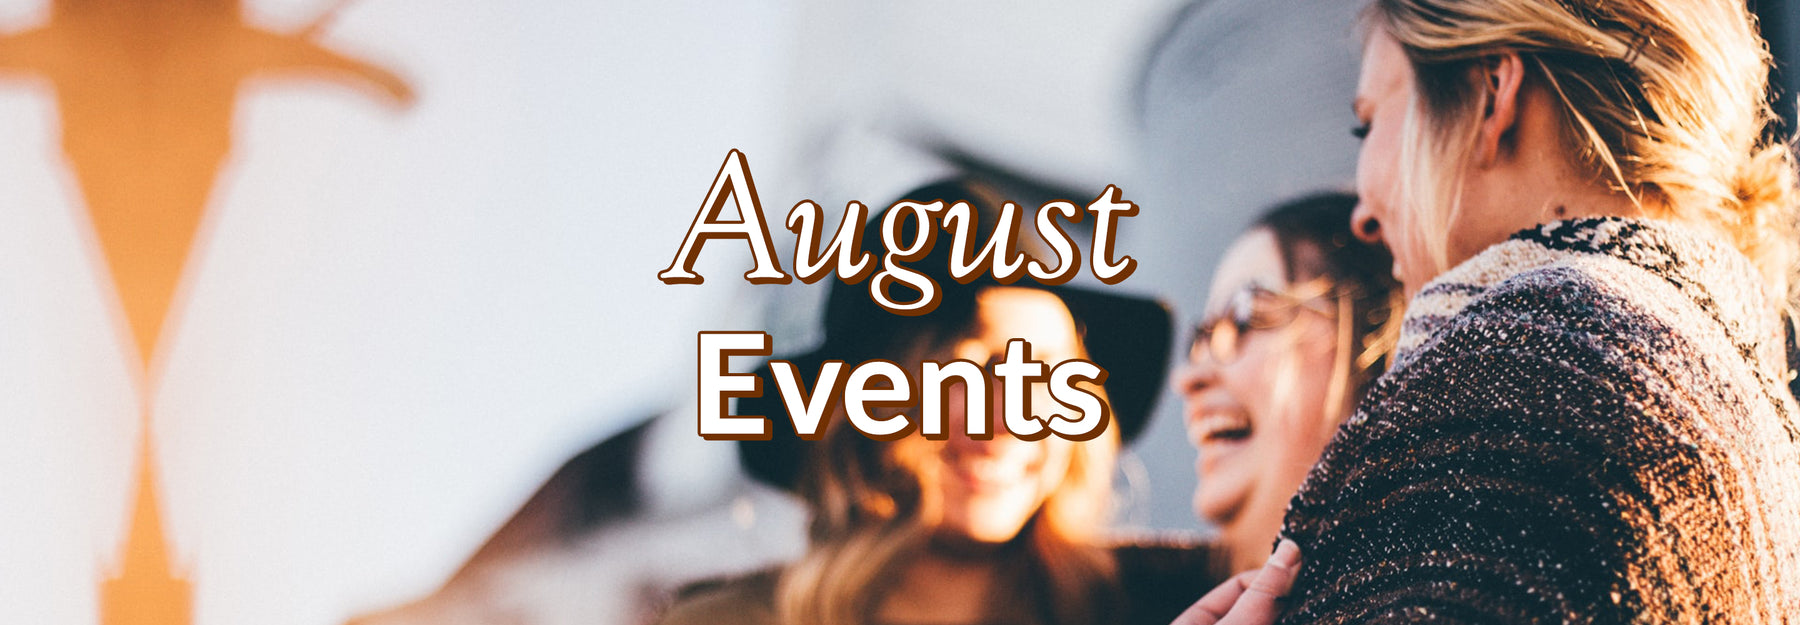 August Events at Wordsworth Books